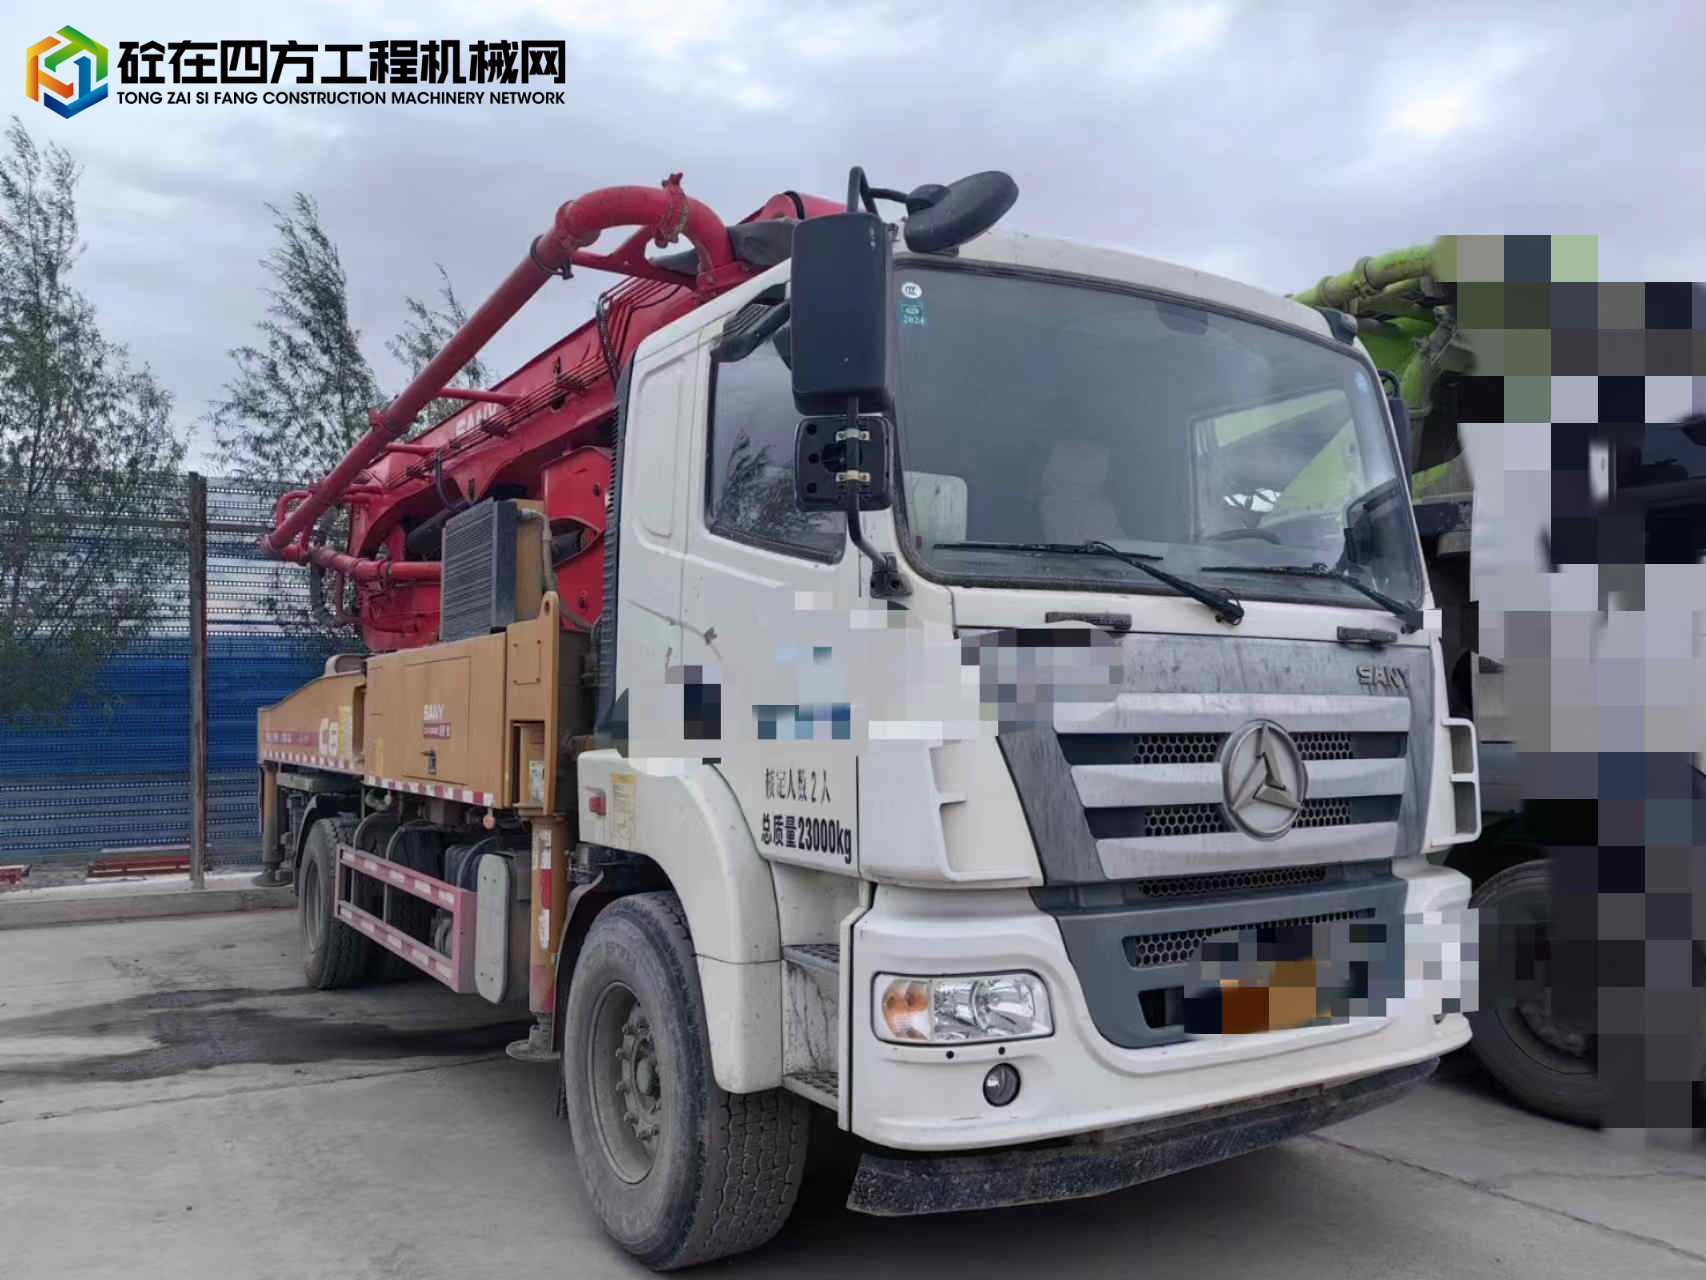 https://images.tongzsf.com/tong/truck_machine/20231025/1653878c15bf1a.jpg